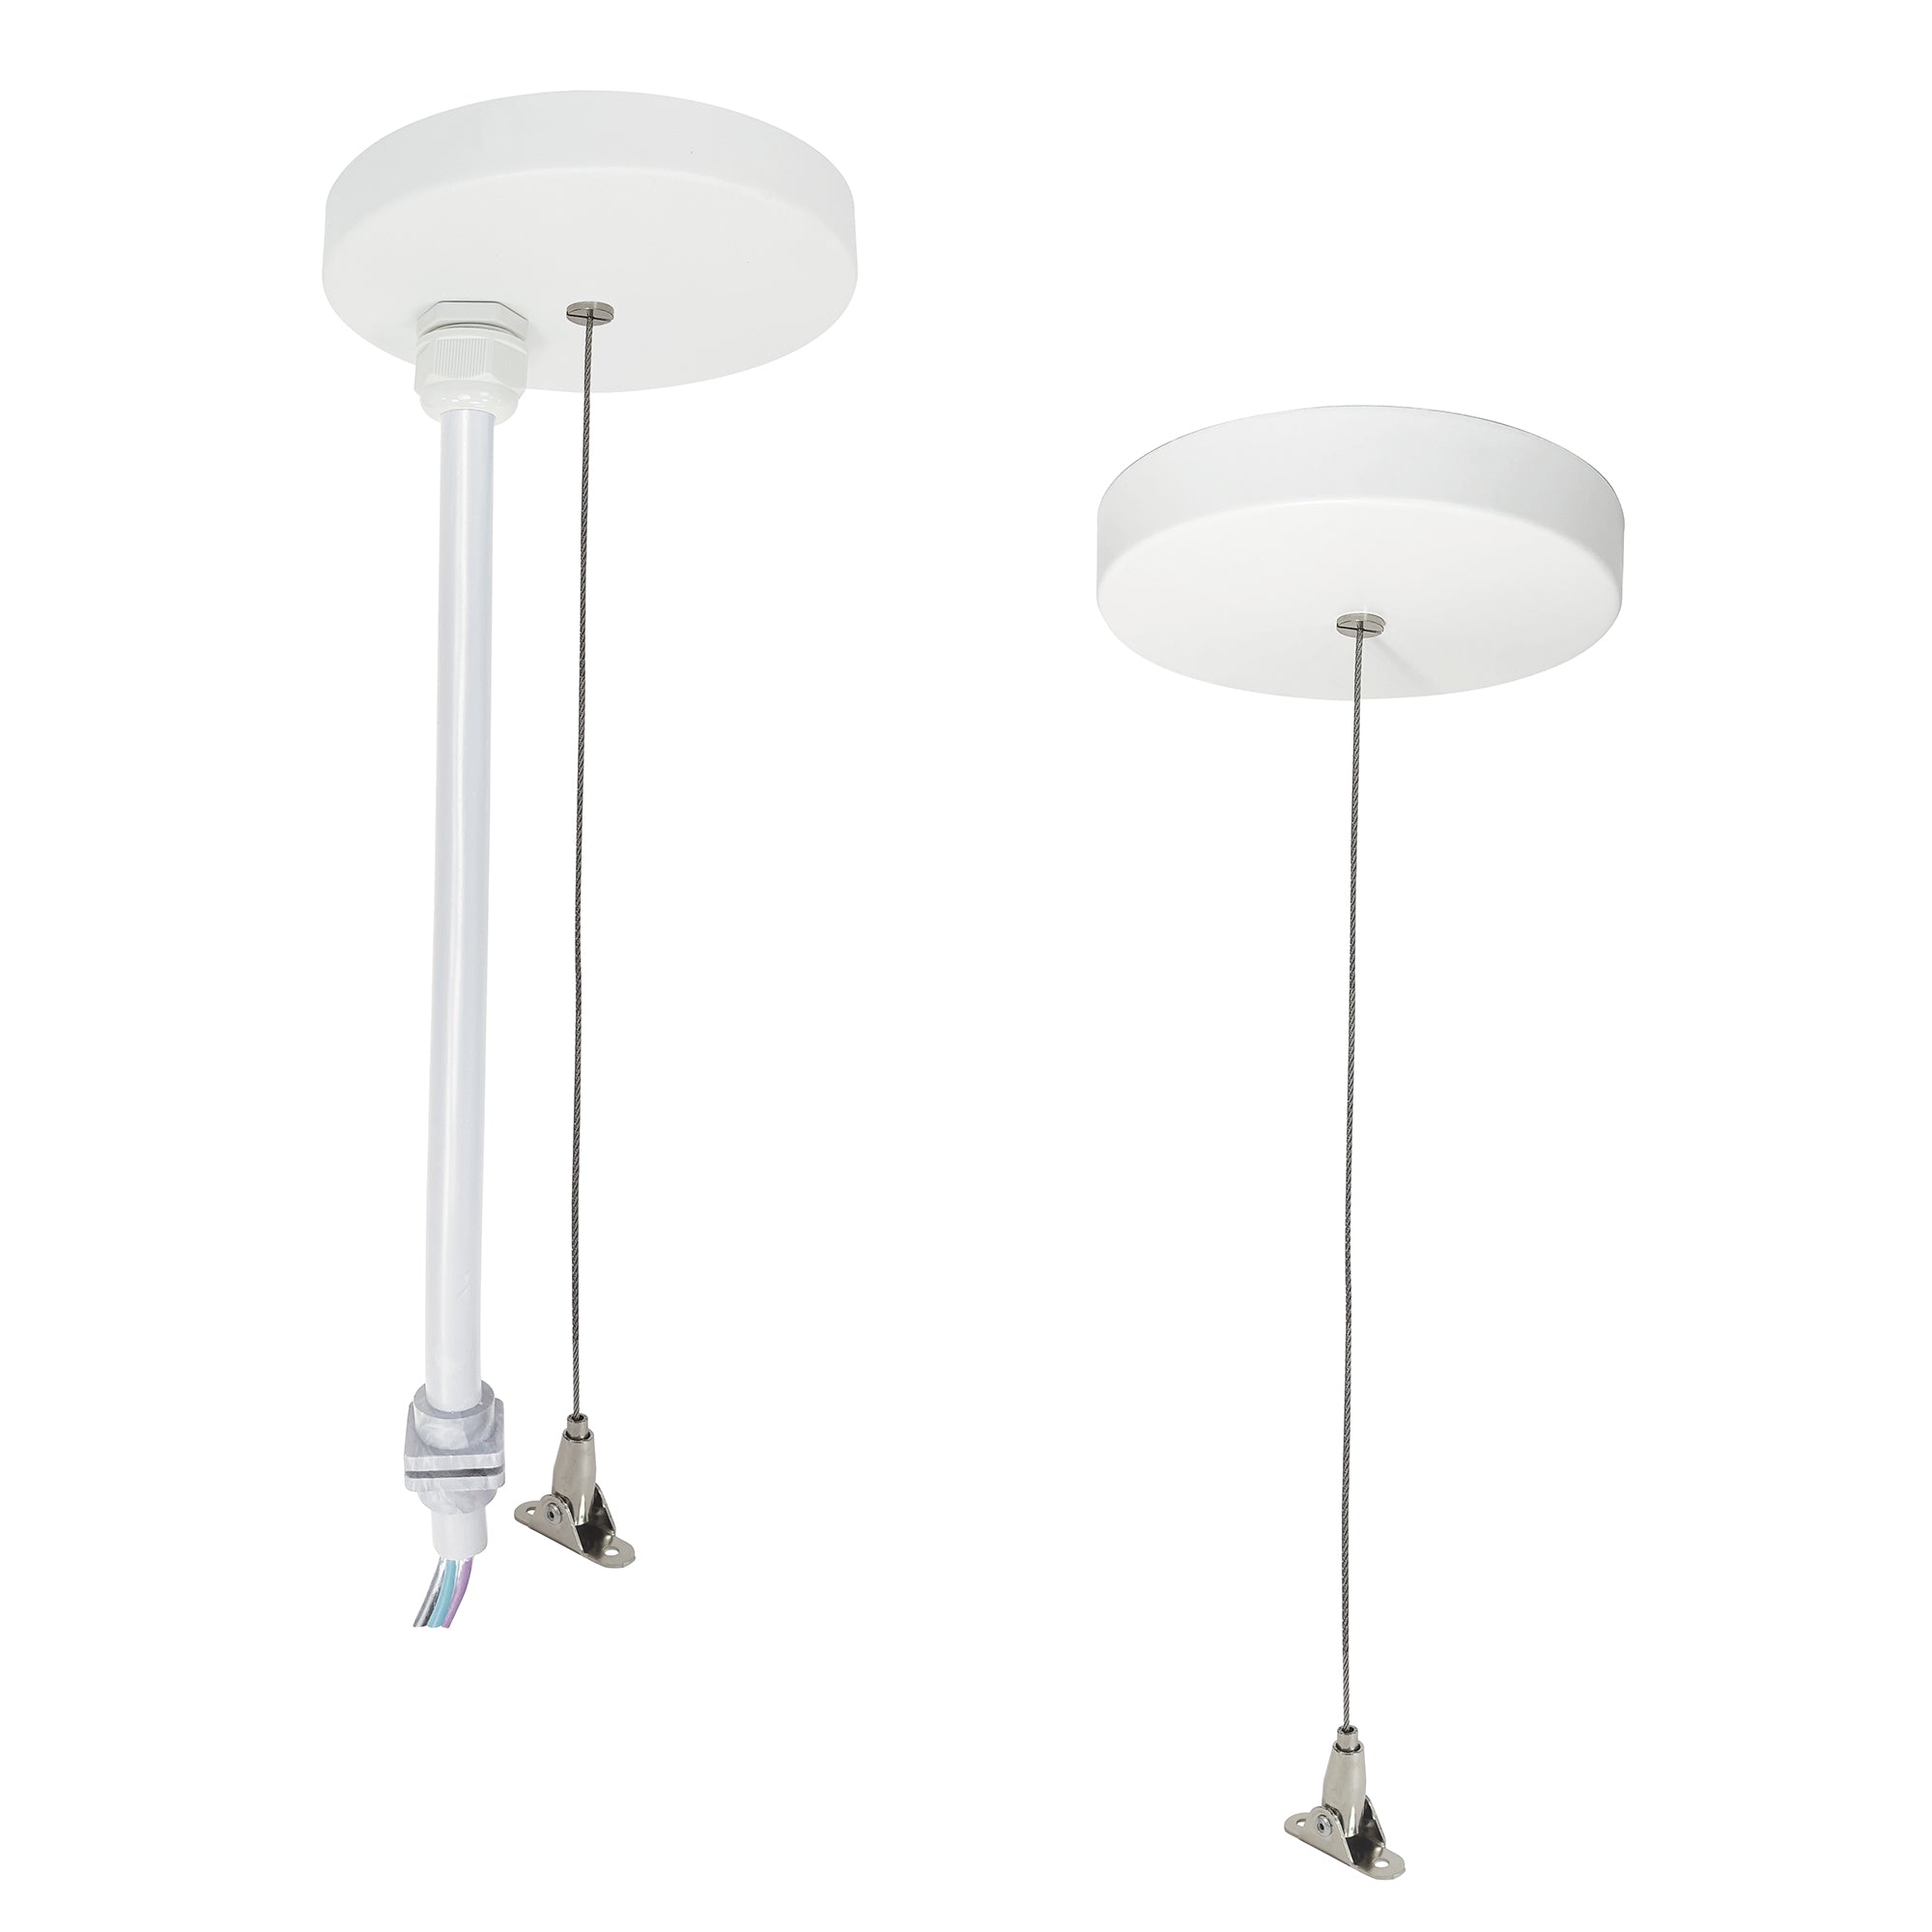 Nora Lighting NLUD-PCCW/6W - Linear - 8' Pendant Power & Aircraft Mounting Kit for NLUD Series, White Finish, wired for EM